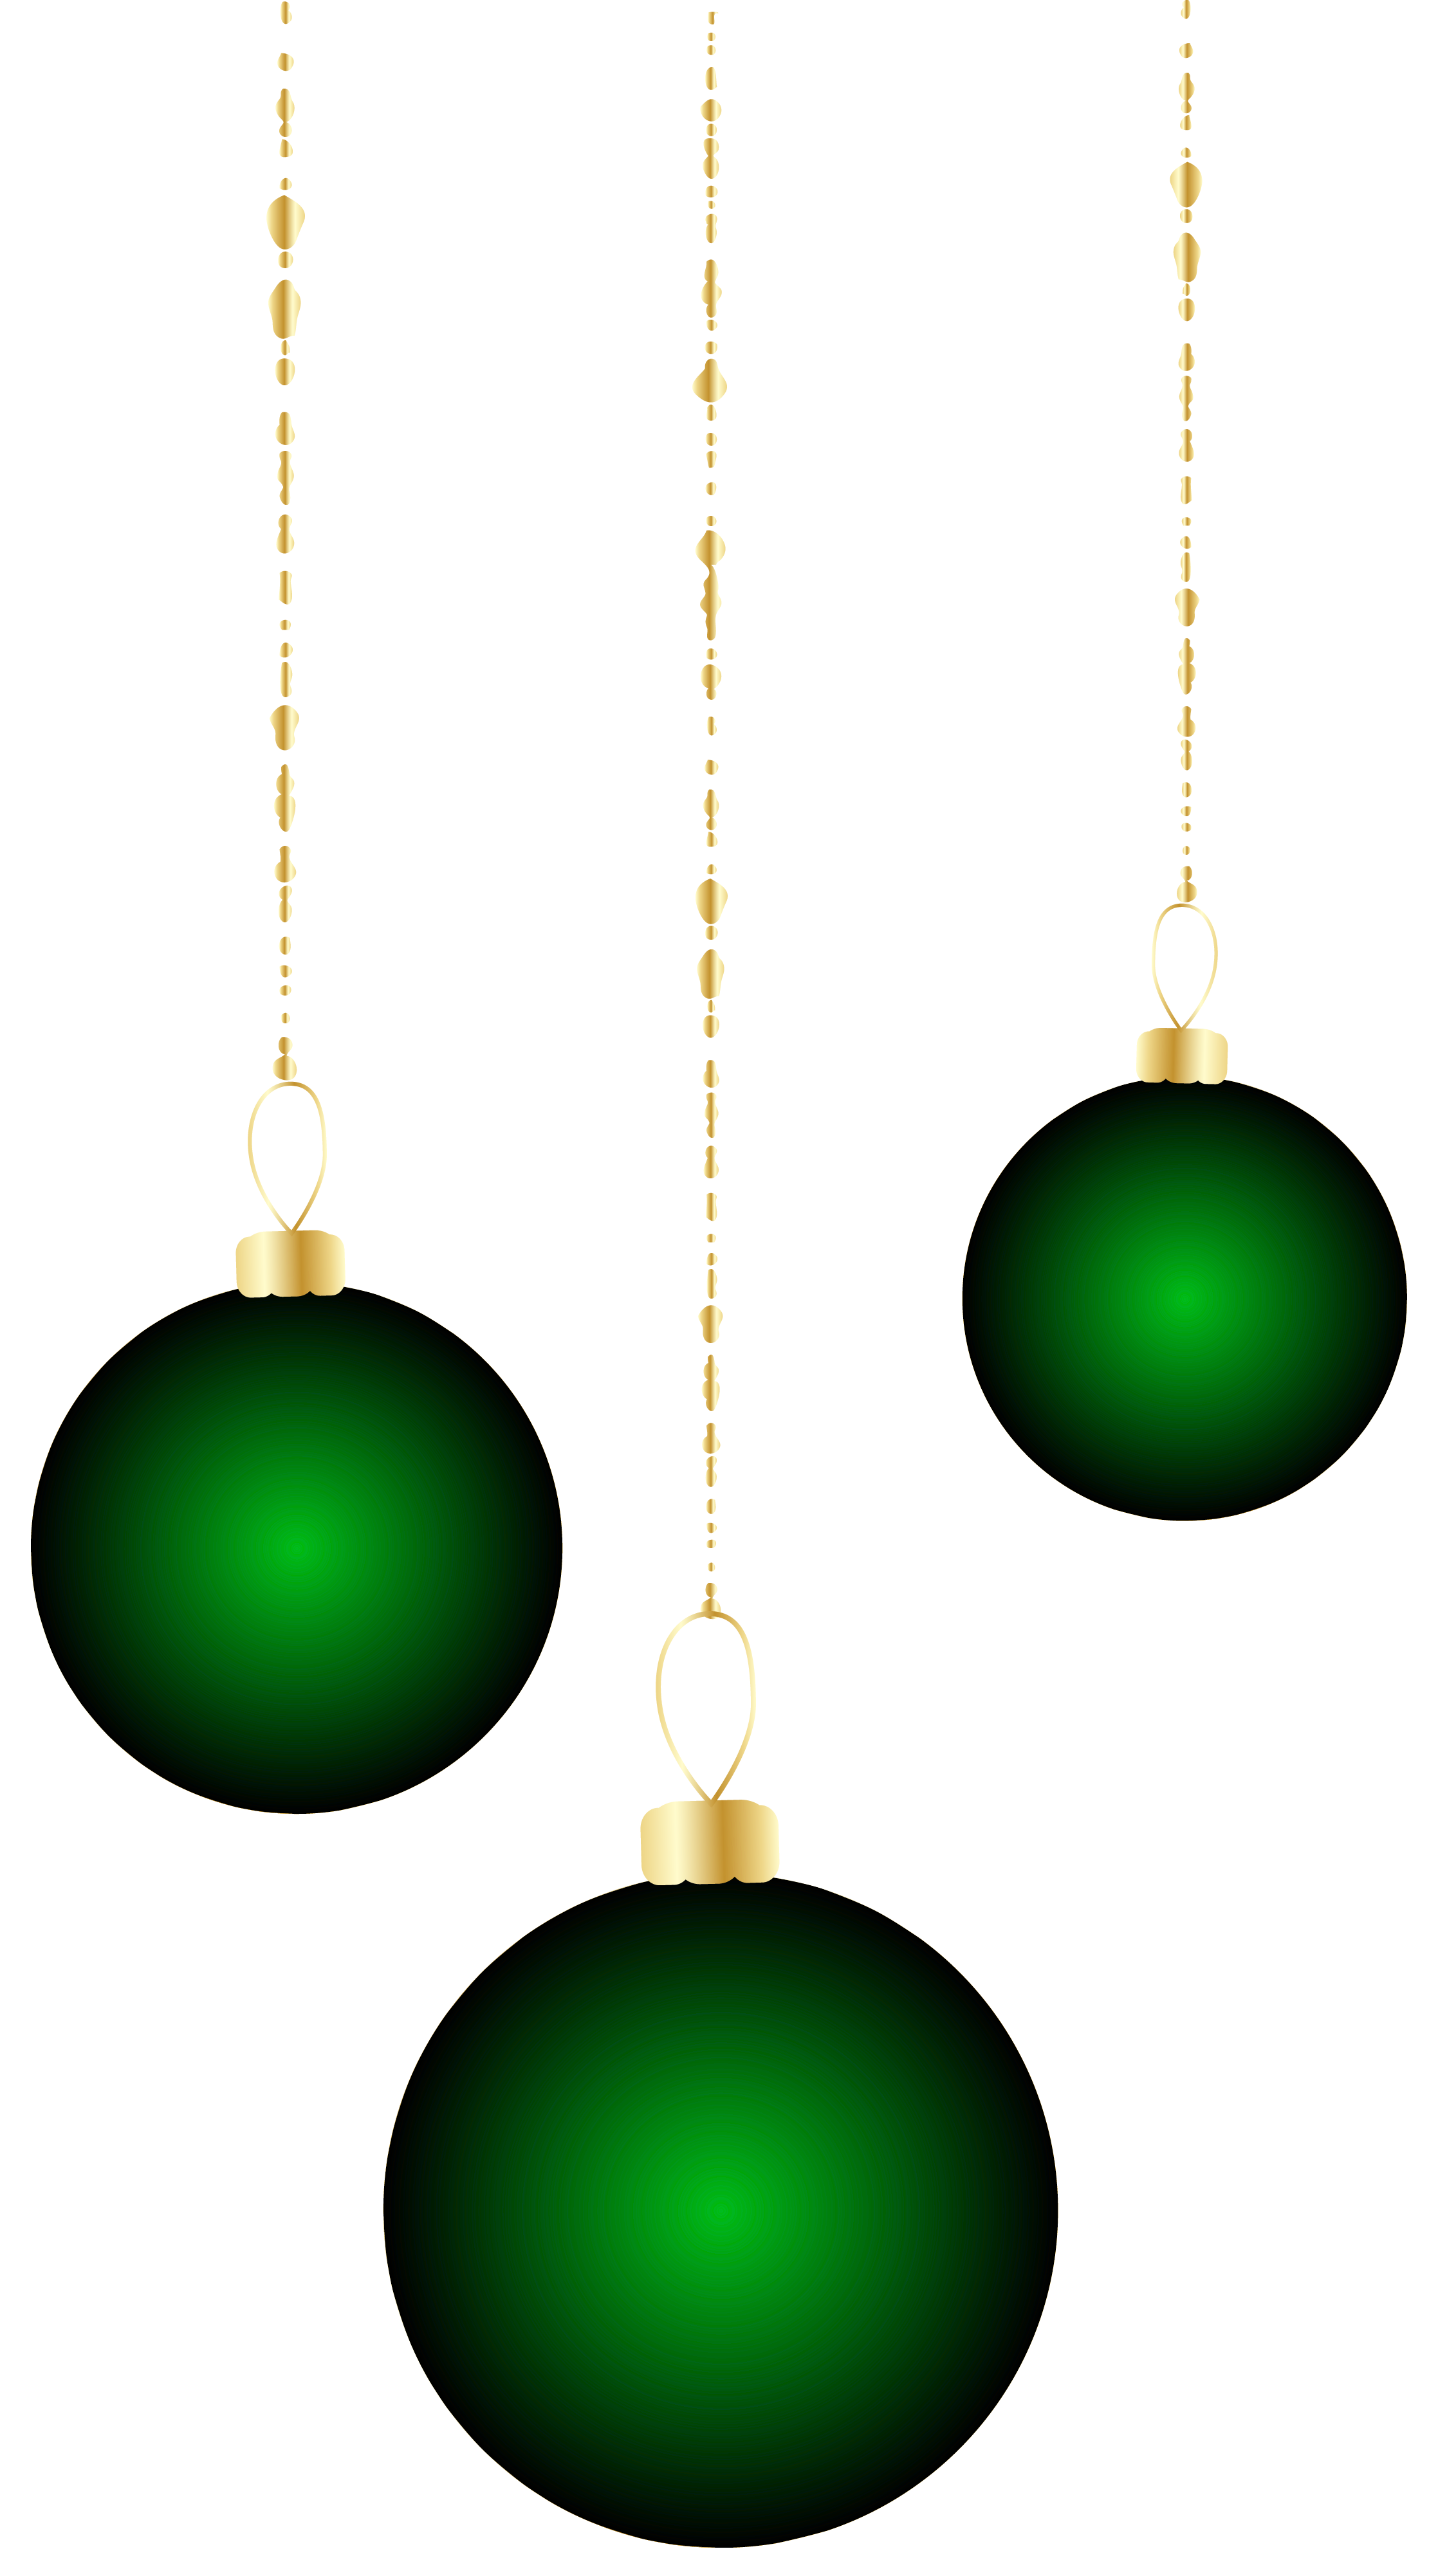 Ornaments clipart green. Transparent christmas png gallery